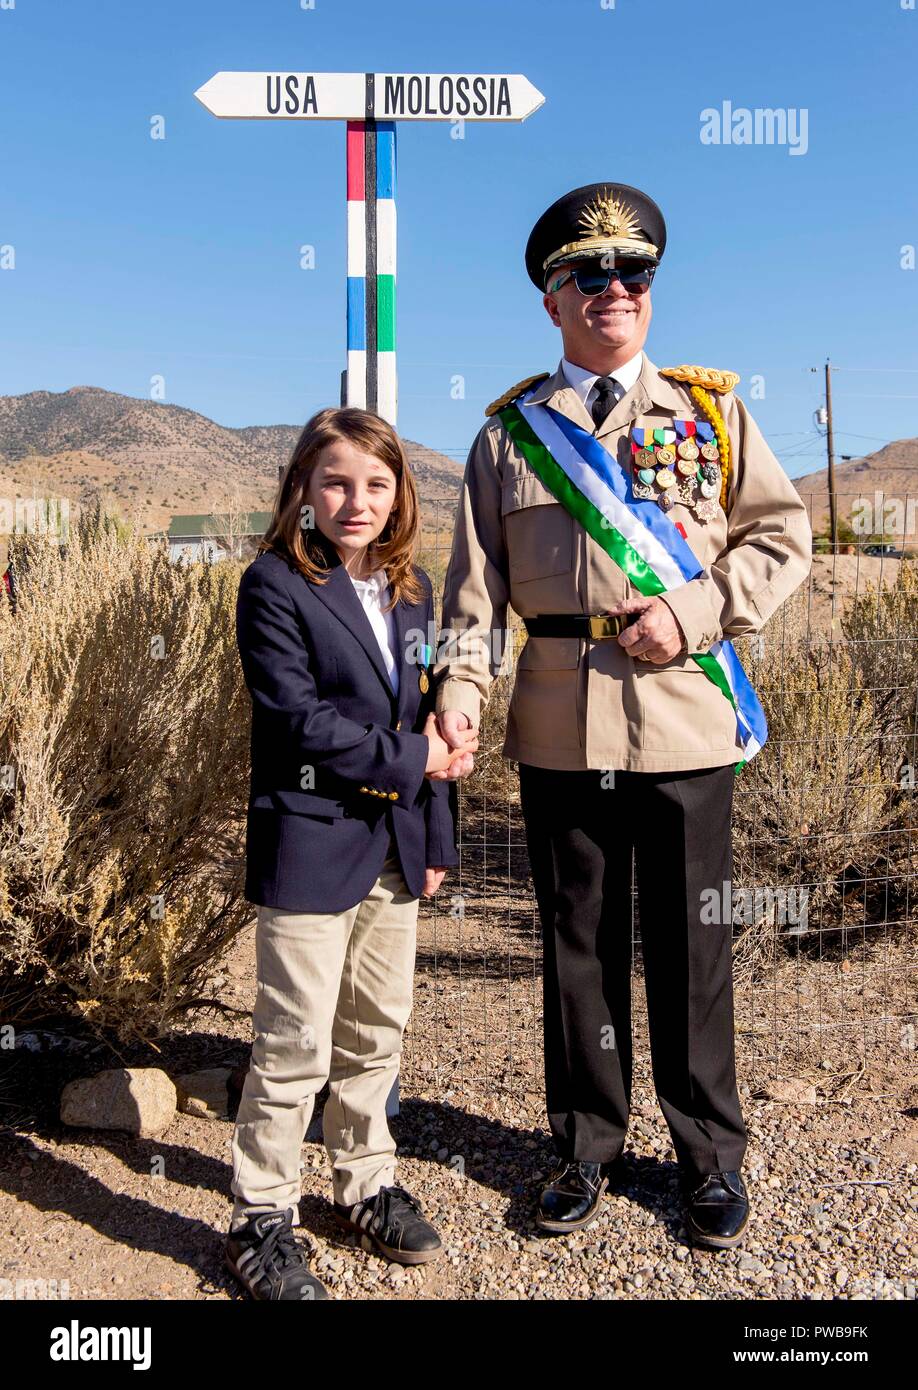 Dayton, Nevada, USA. 14th Oct, 2018. His Excellency KEVIN BAUGH, president  and benevolent dictator of the Republic of Molossia, right, and ARI  TELFORD, president of the Federal Republic of Caddia, pose for